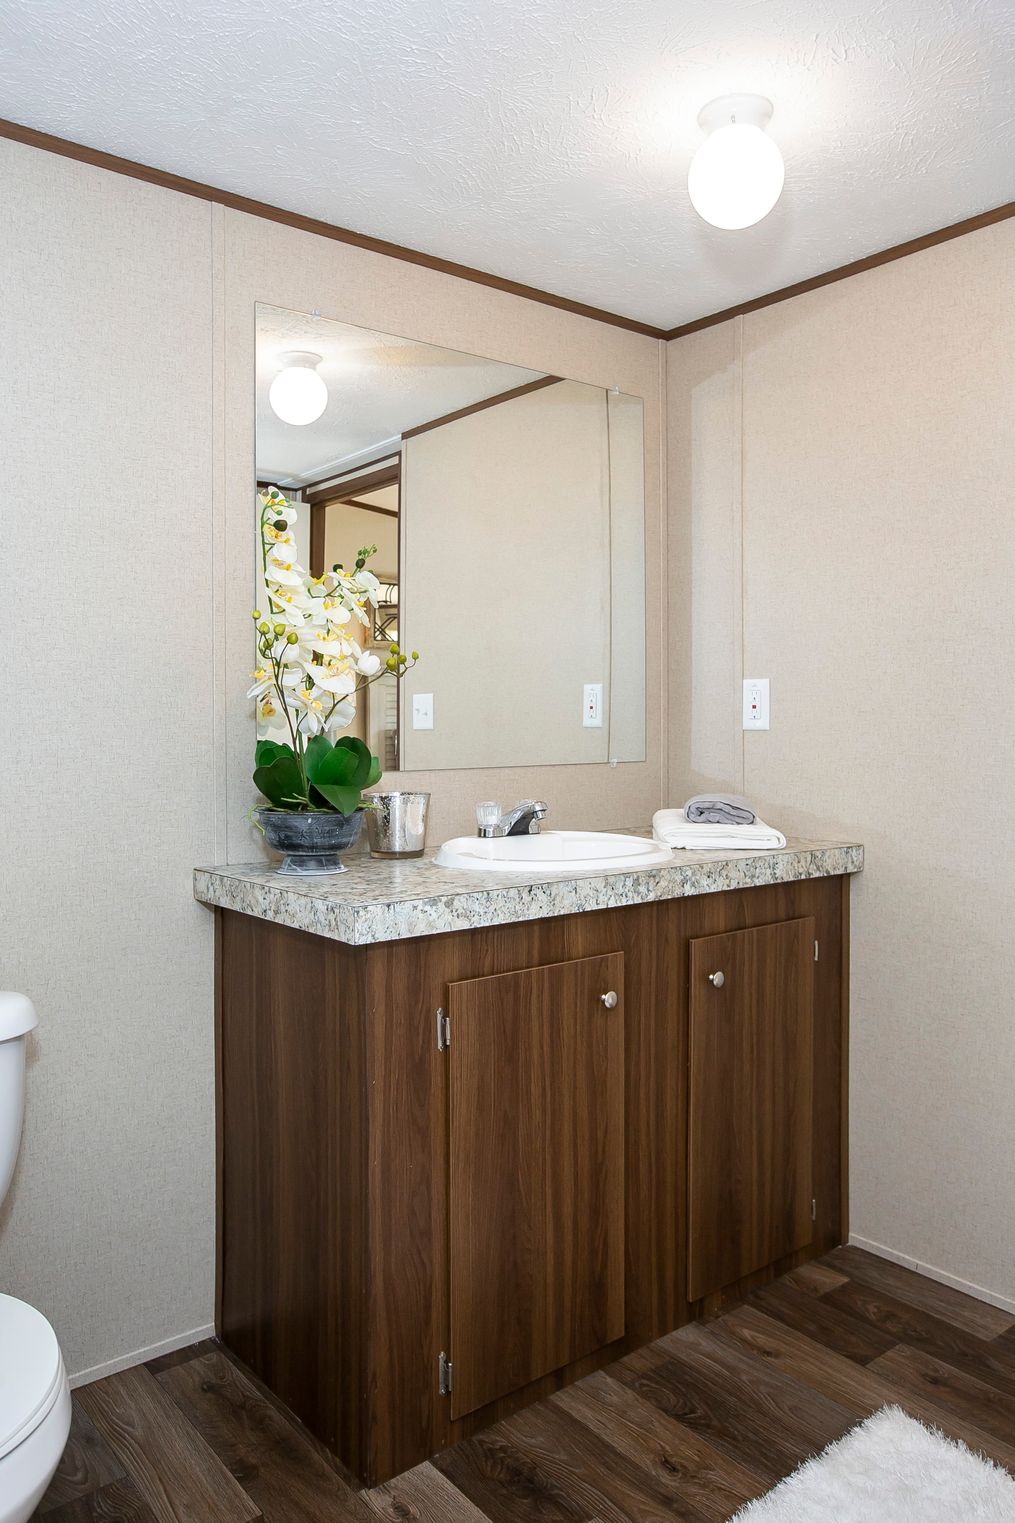 The TRIUMPH Master Bathroom. This Manufactured Mobile Home features 5 bedrooms and 3 baths.